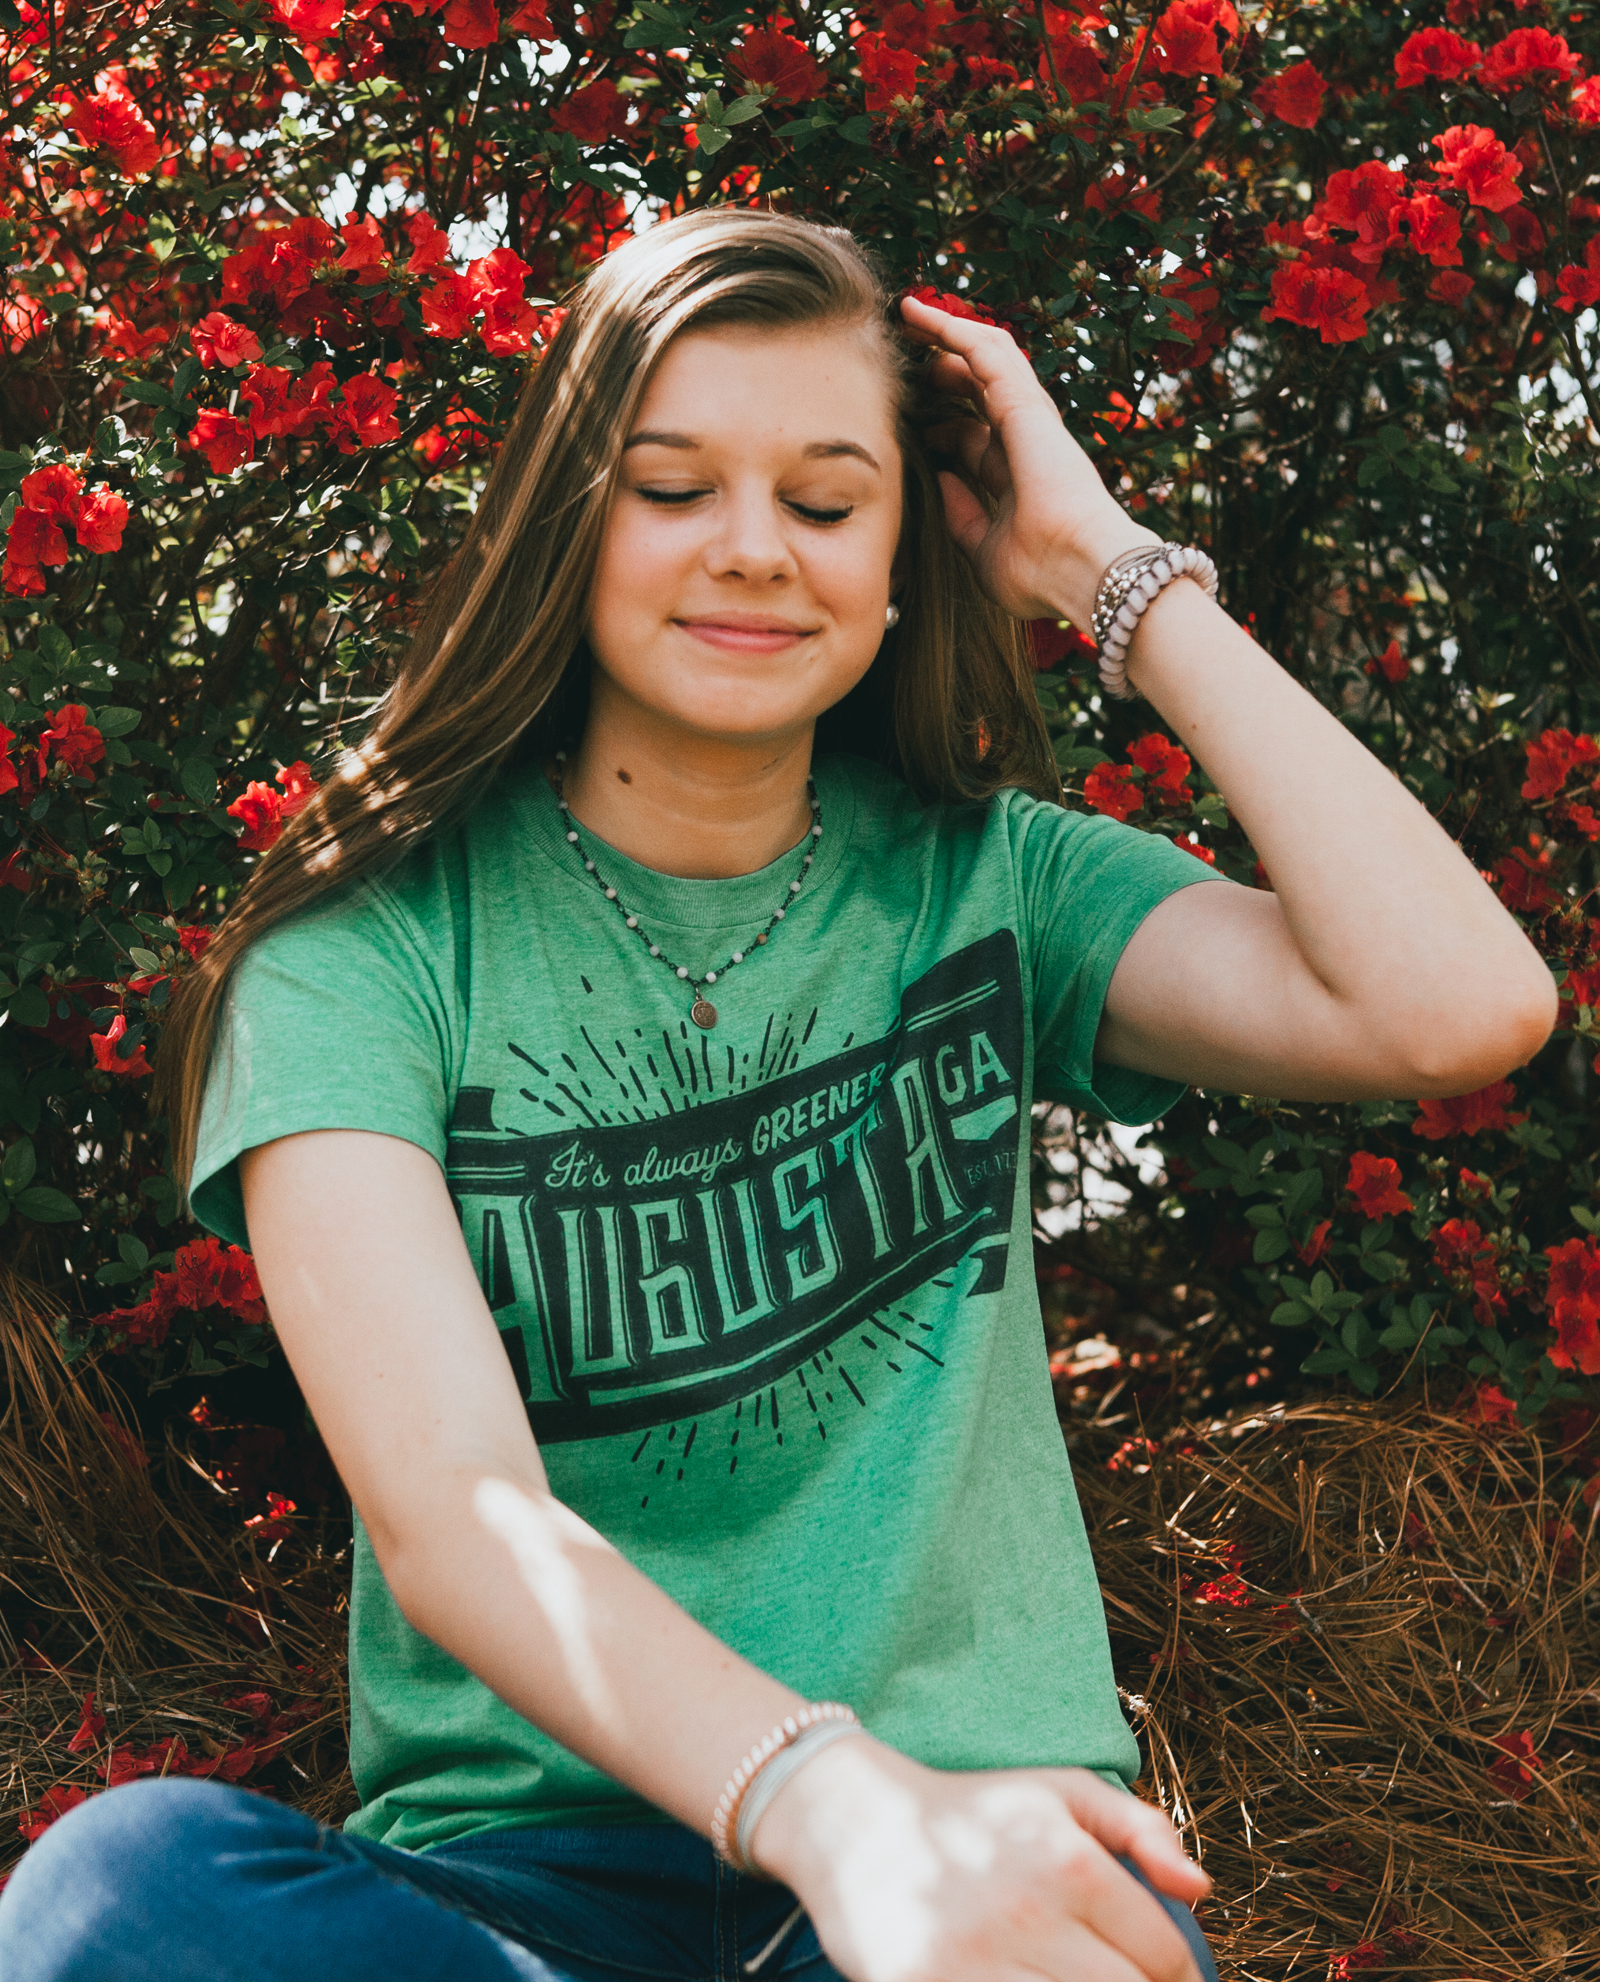 Girl sitting in front of flowers with eyes closed and wearing Always Greener shirt